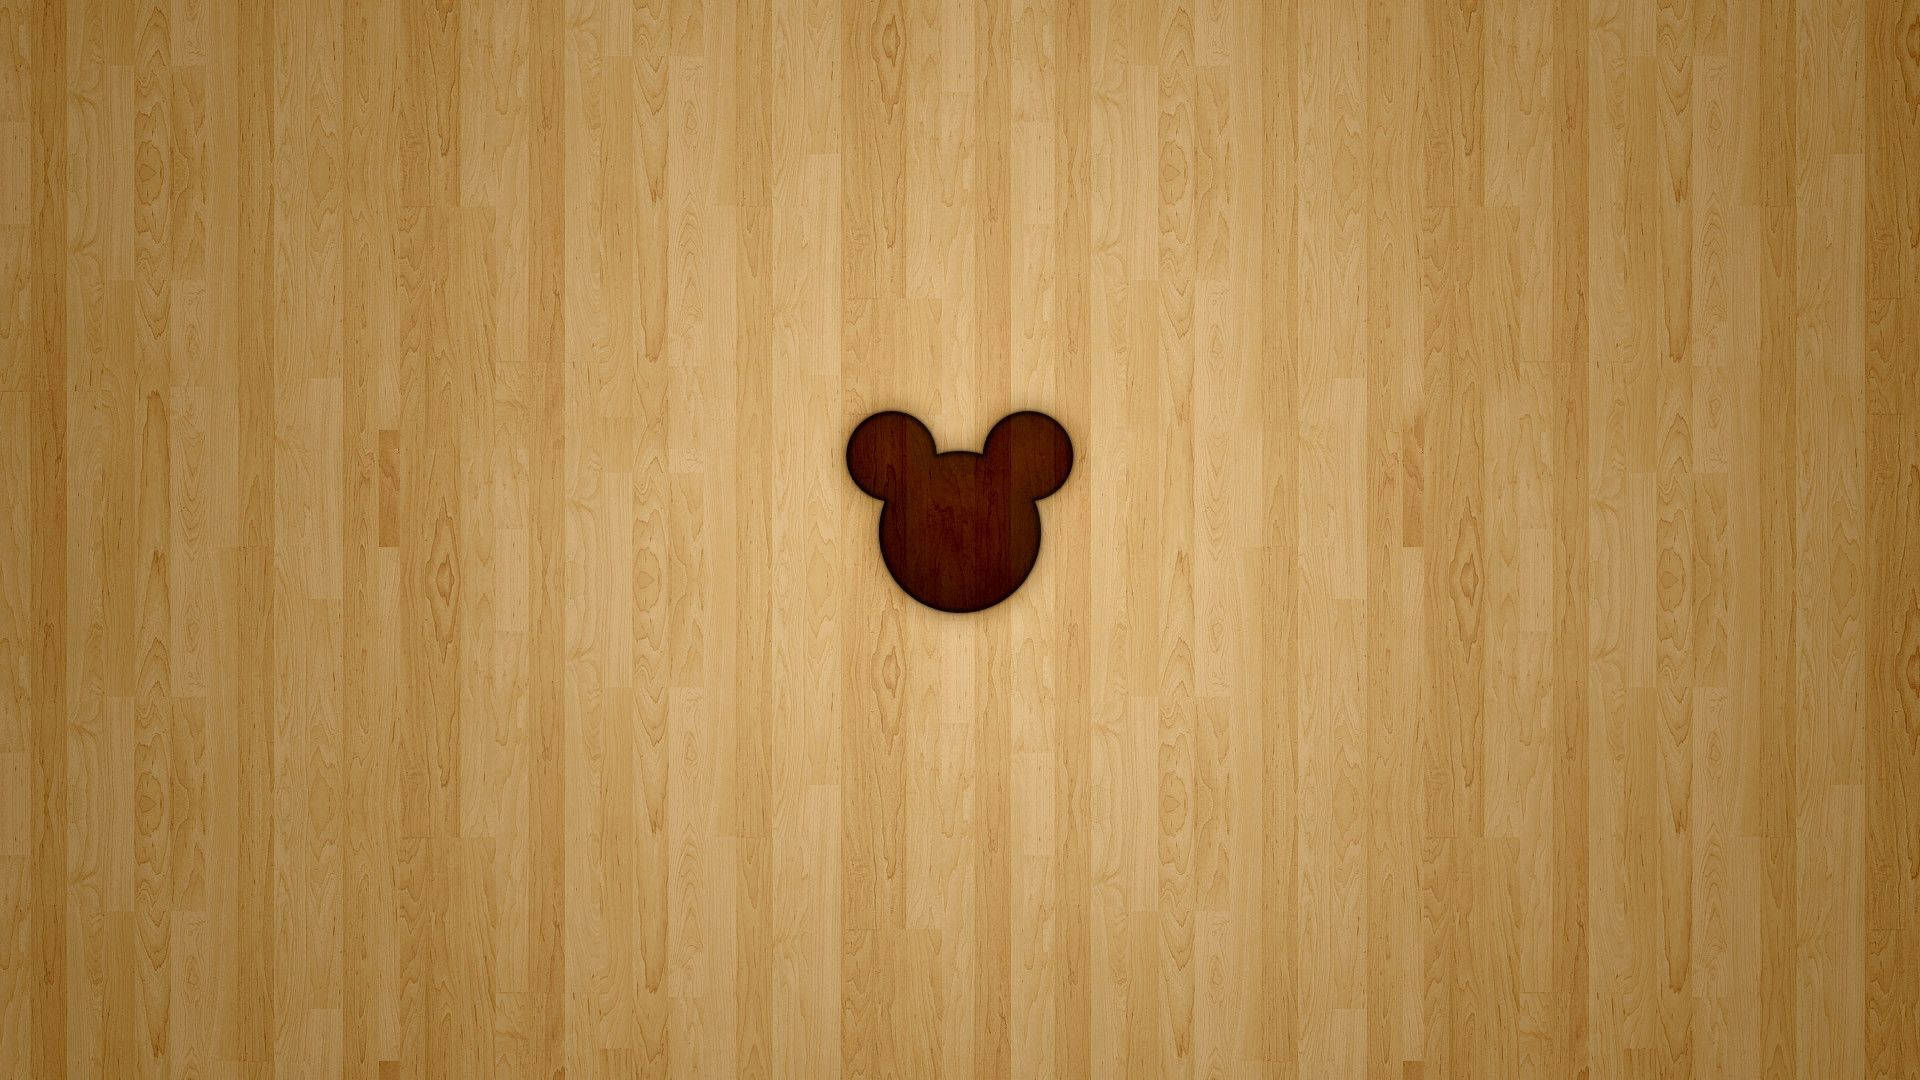 Disney 1920x1080 Hd Mickey Mouse Logo On Wood Background